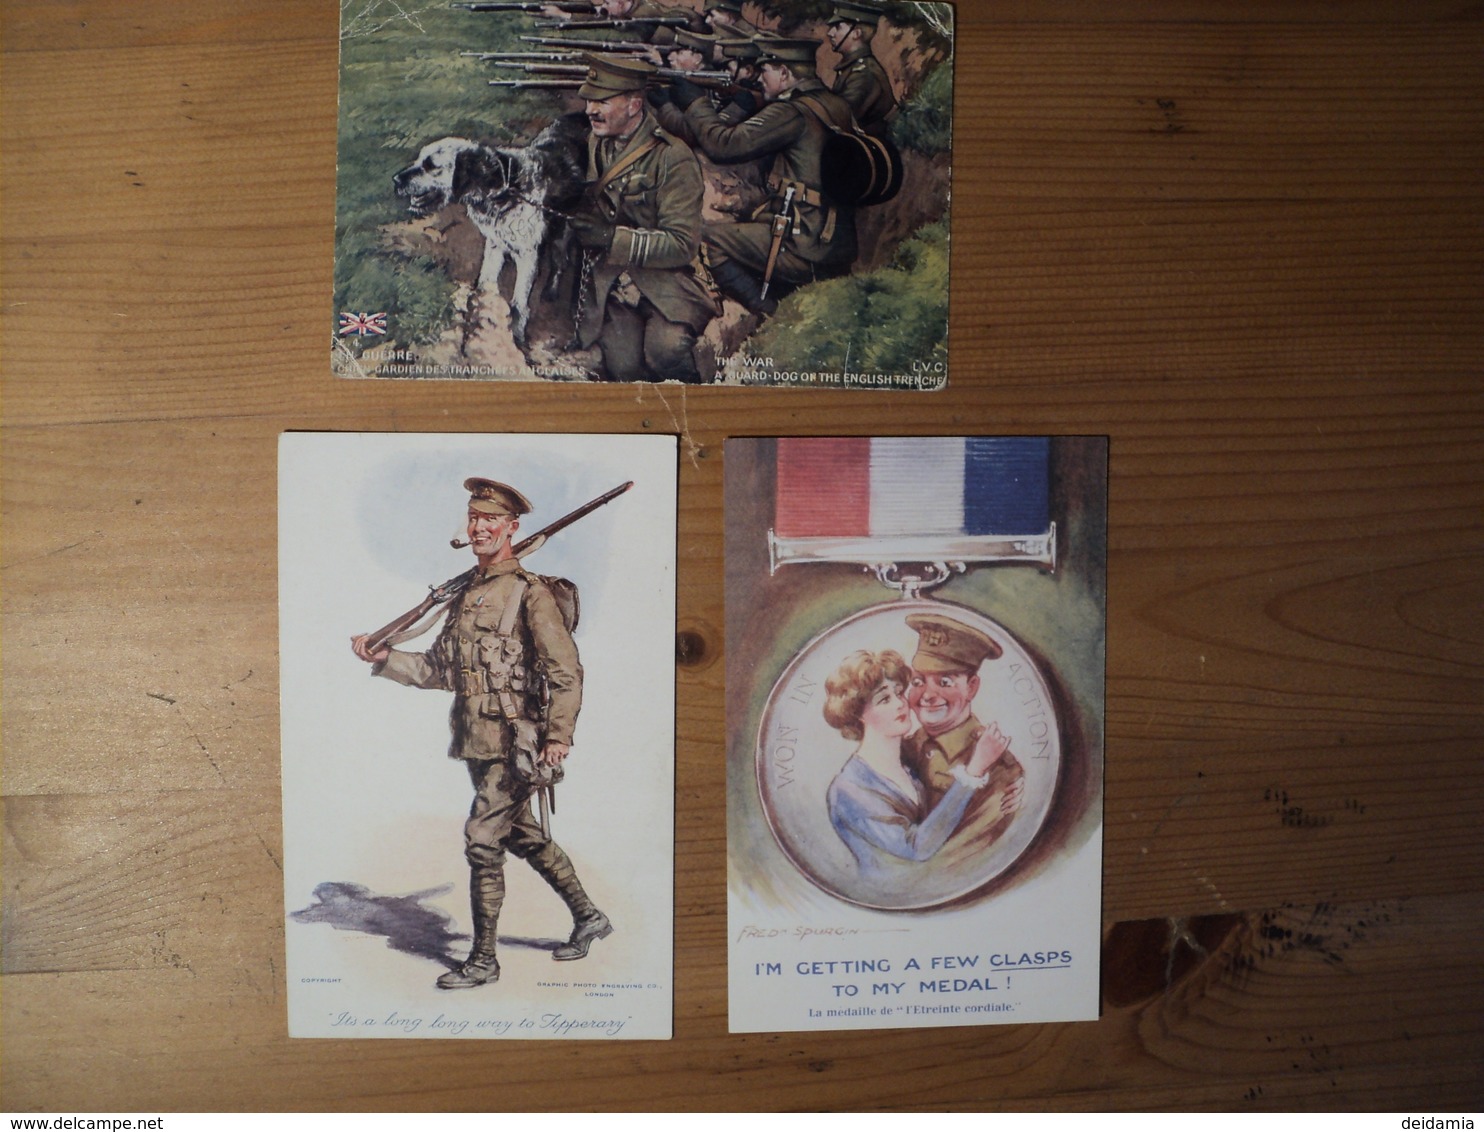 WW1. LOT DE 3 CPA ANGLAISES CHIEN GARDIEN DES TRANCHEES ANGLAISES / PROPAGANDES. IT S A LONG WAY TO TIPPERARY / I M GET - Guerre 1914-18